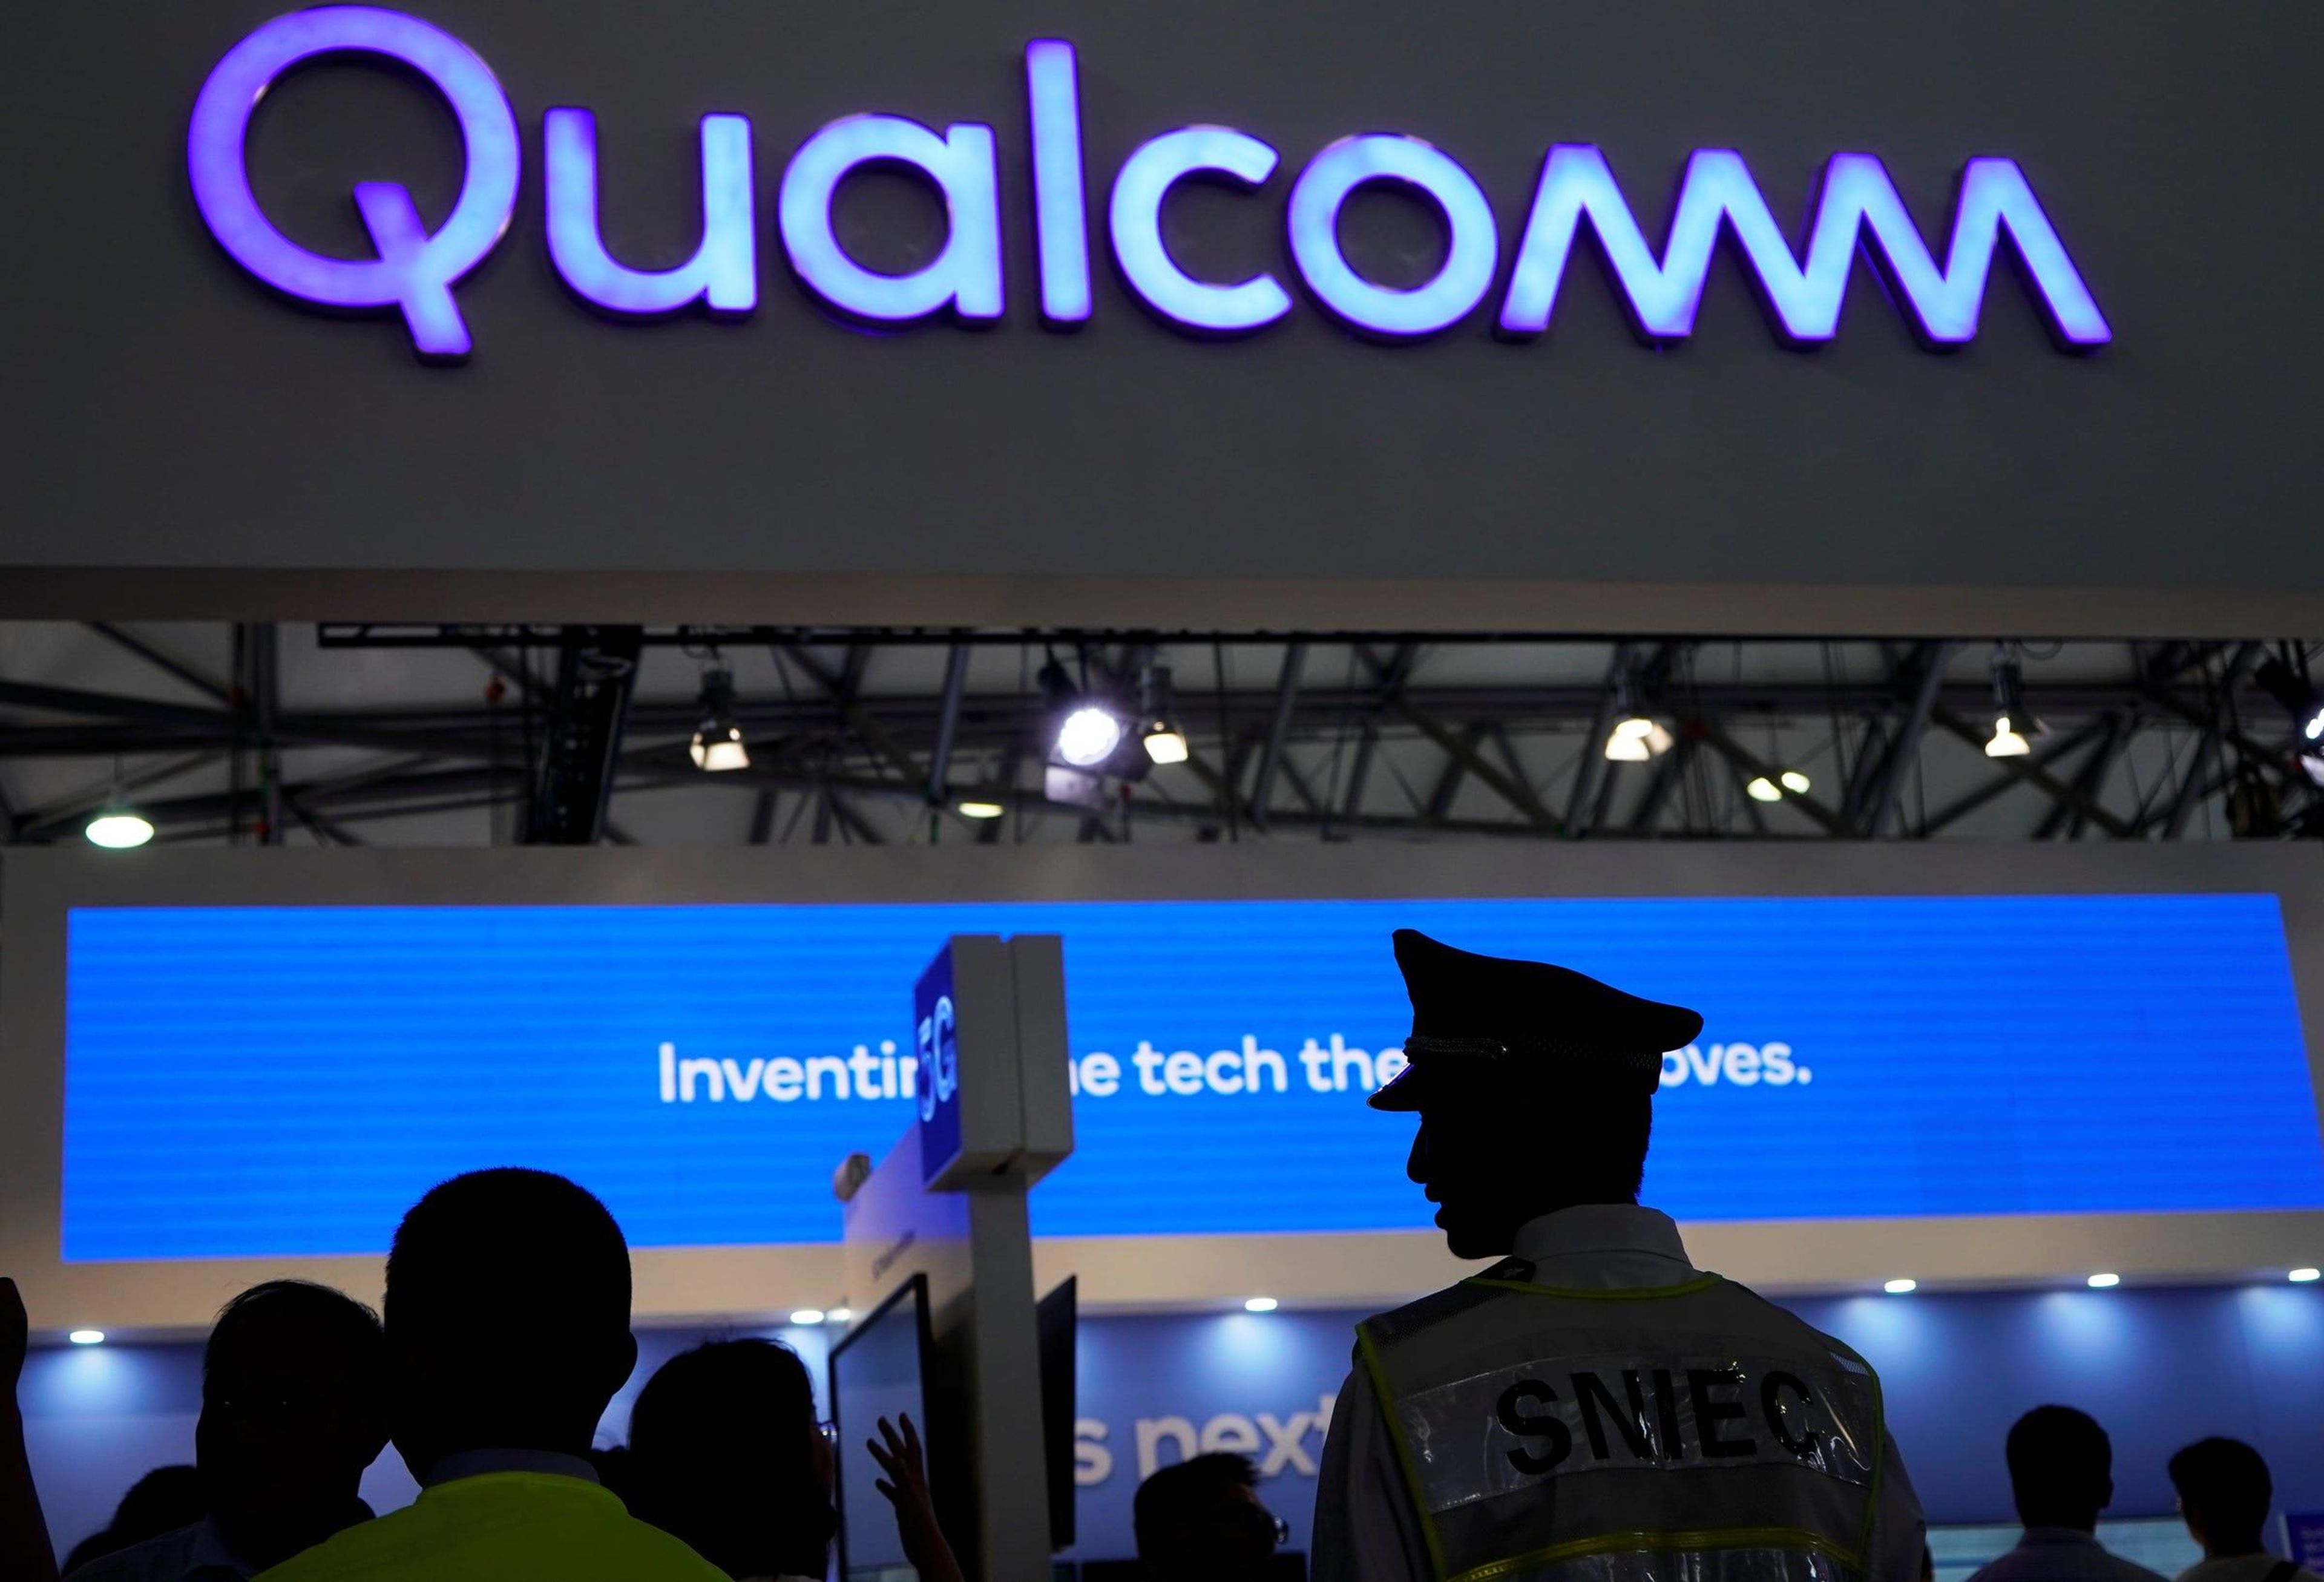 It'll likely be powered by Qualcomm's new Snapdragon 865+ processor.